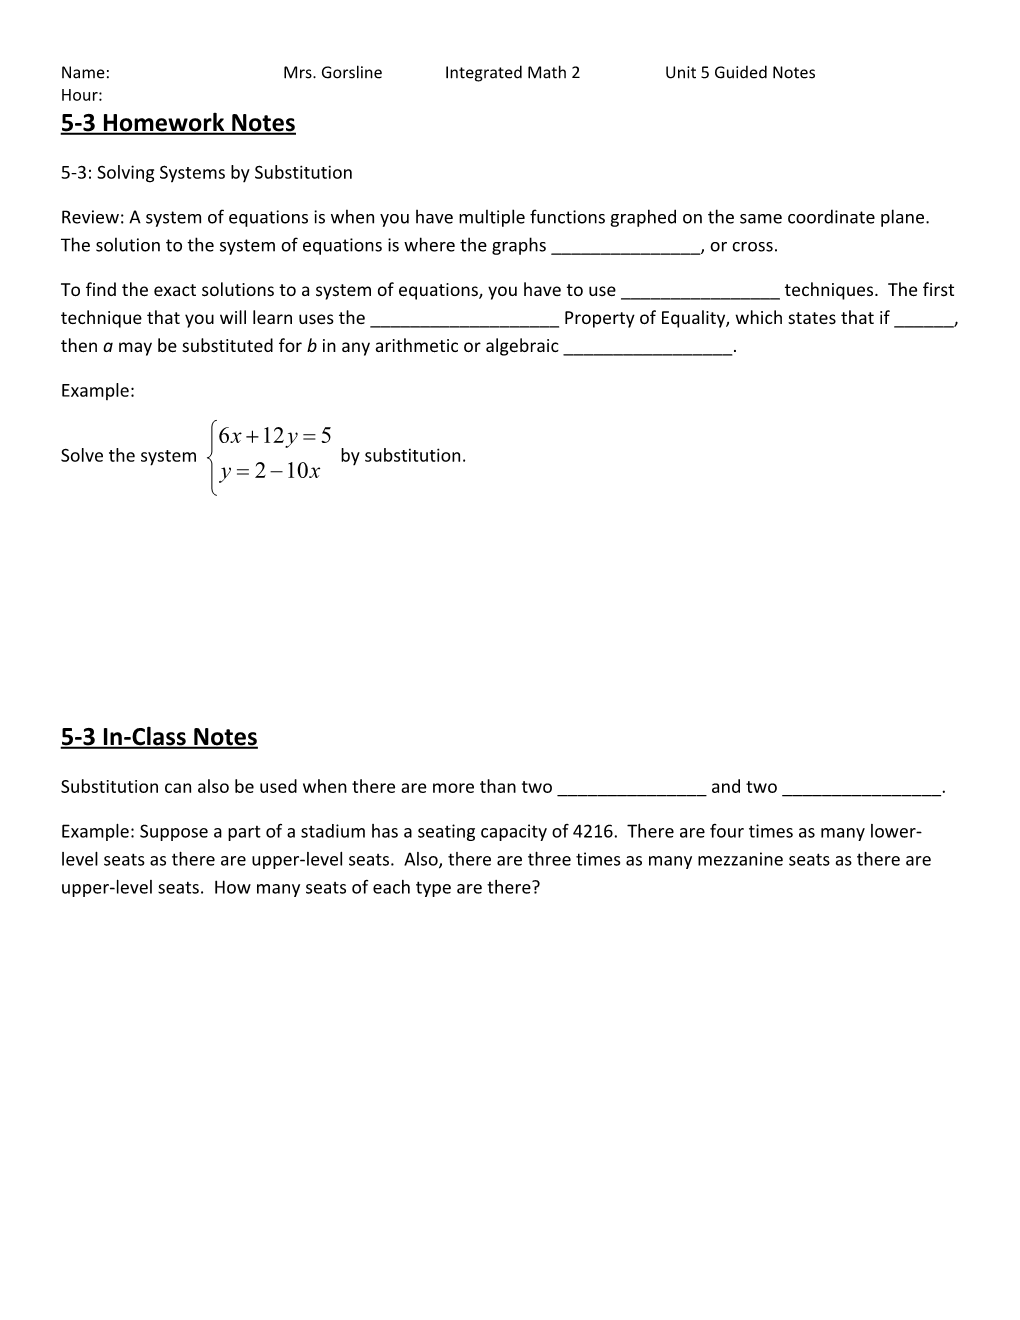 Name: Mrs. Gorsline Integrated Math 2Unit 5 Guided Notes